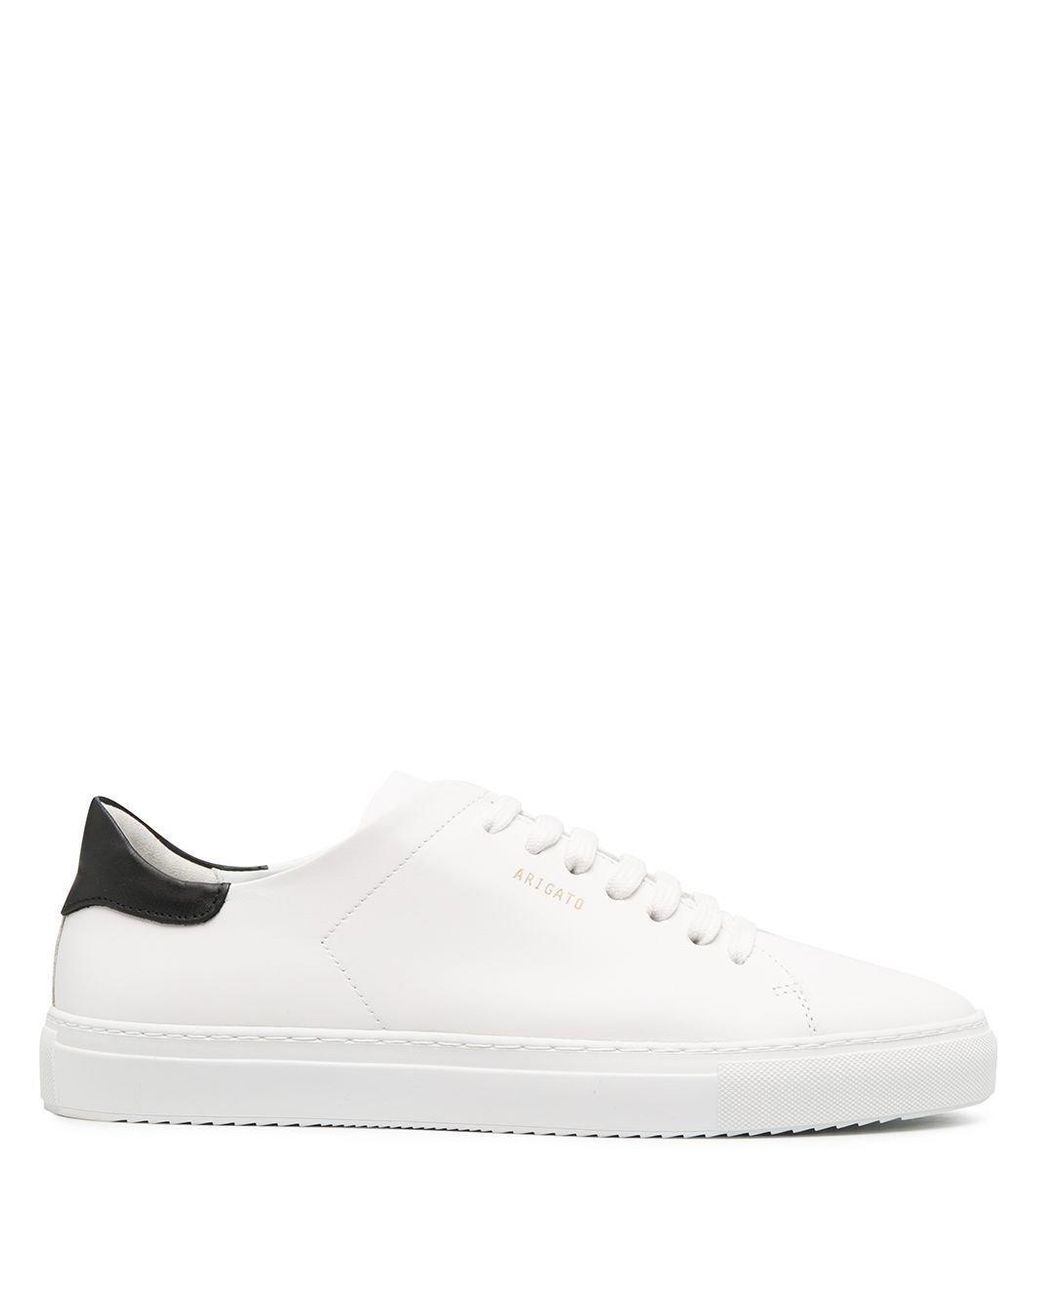 Axel Arigato White Leather Sneakers for Men - Lyst